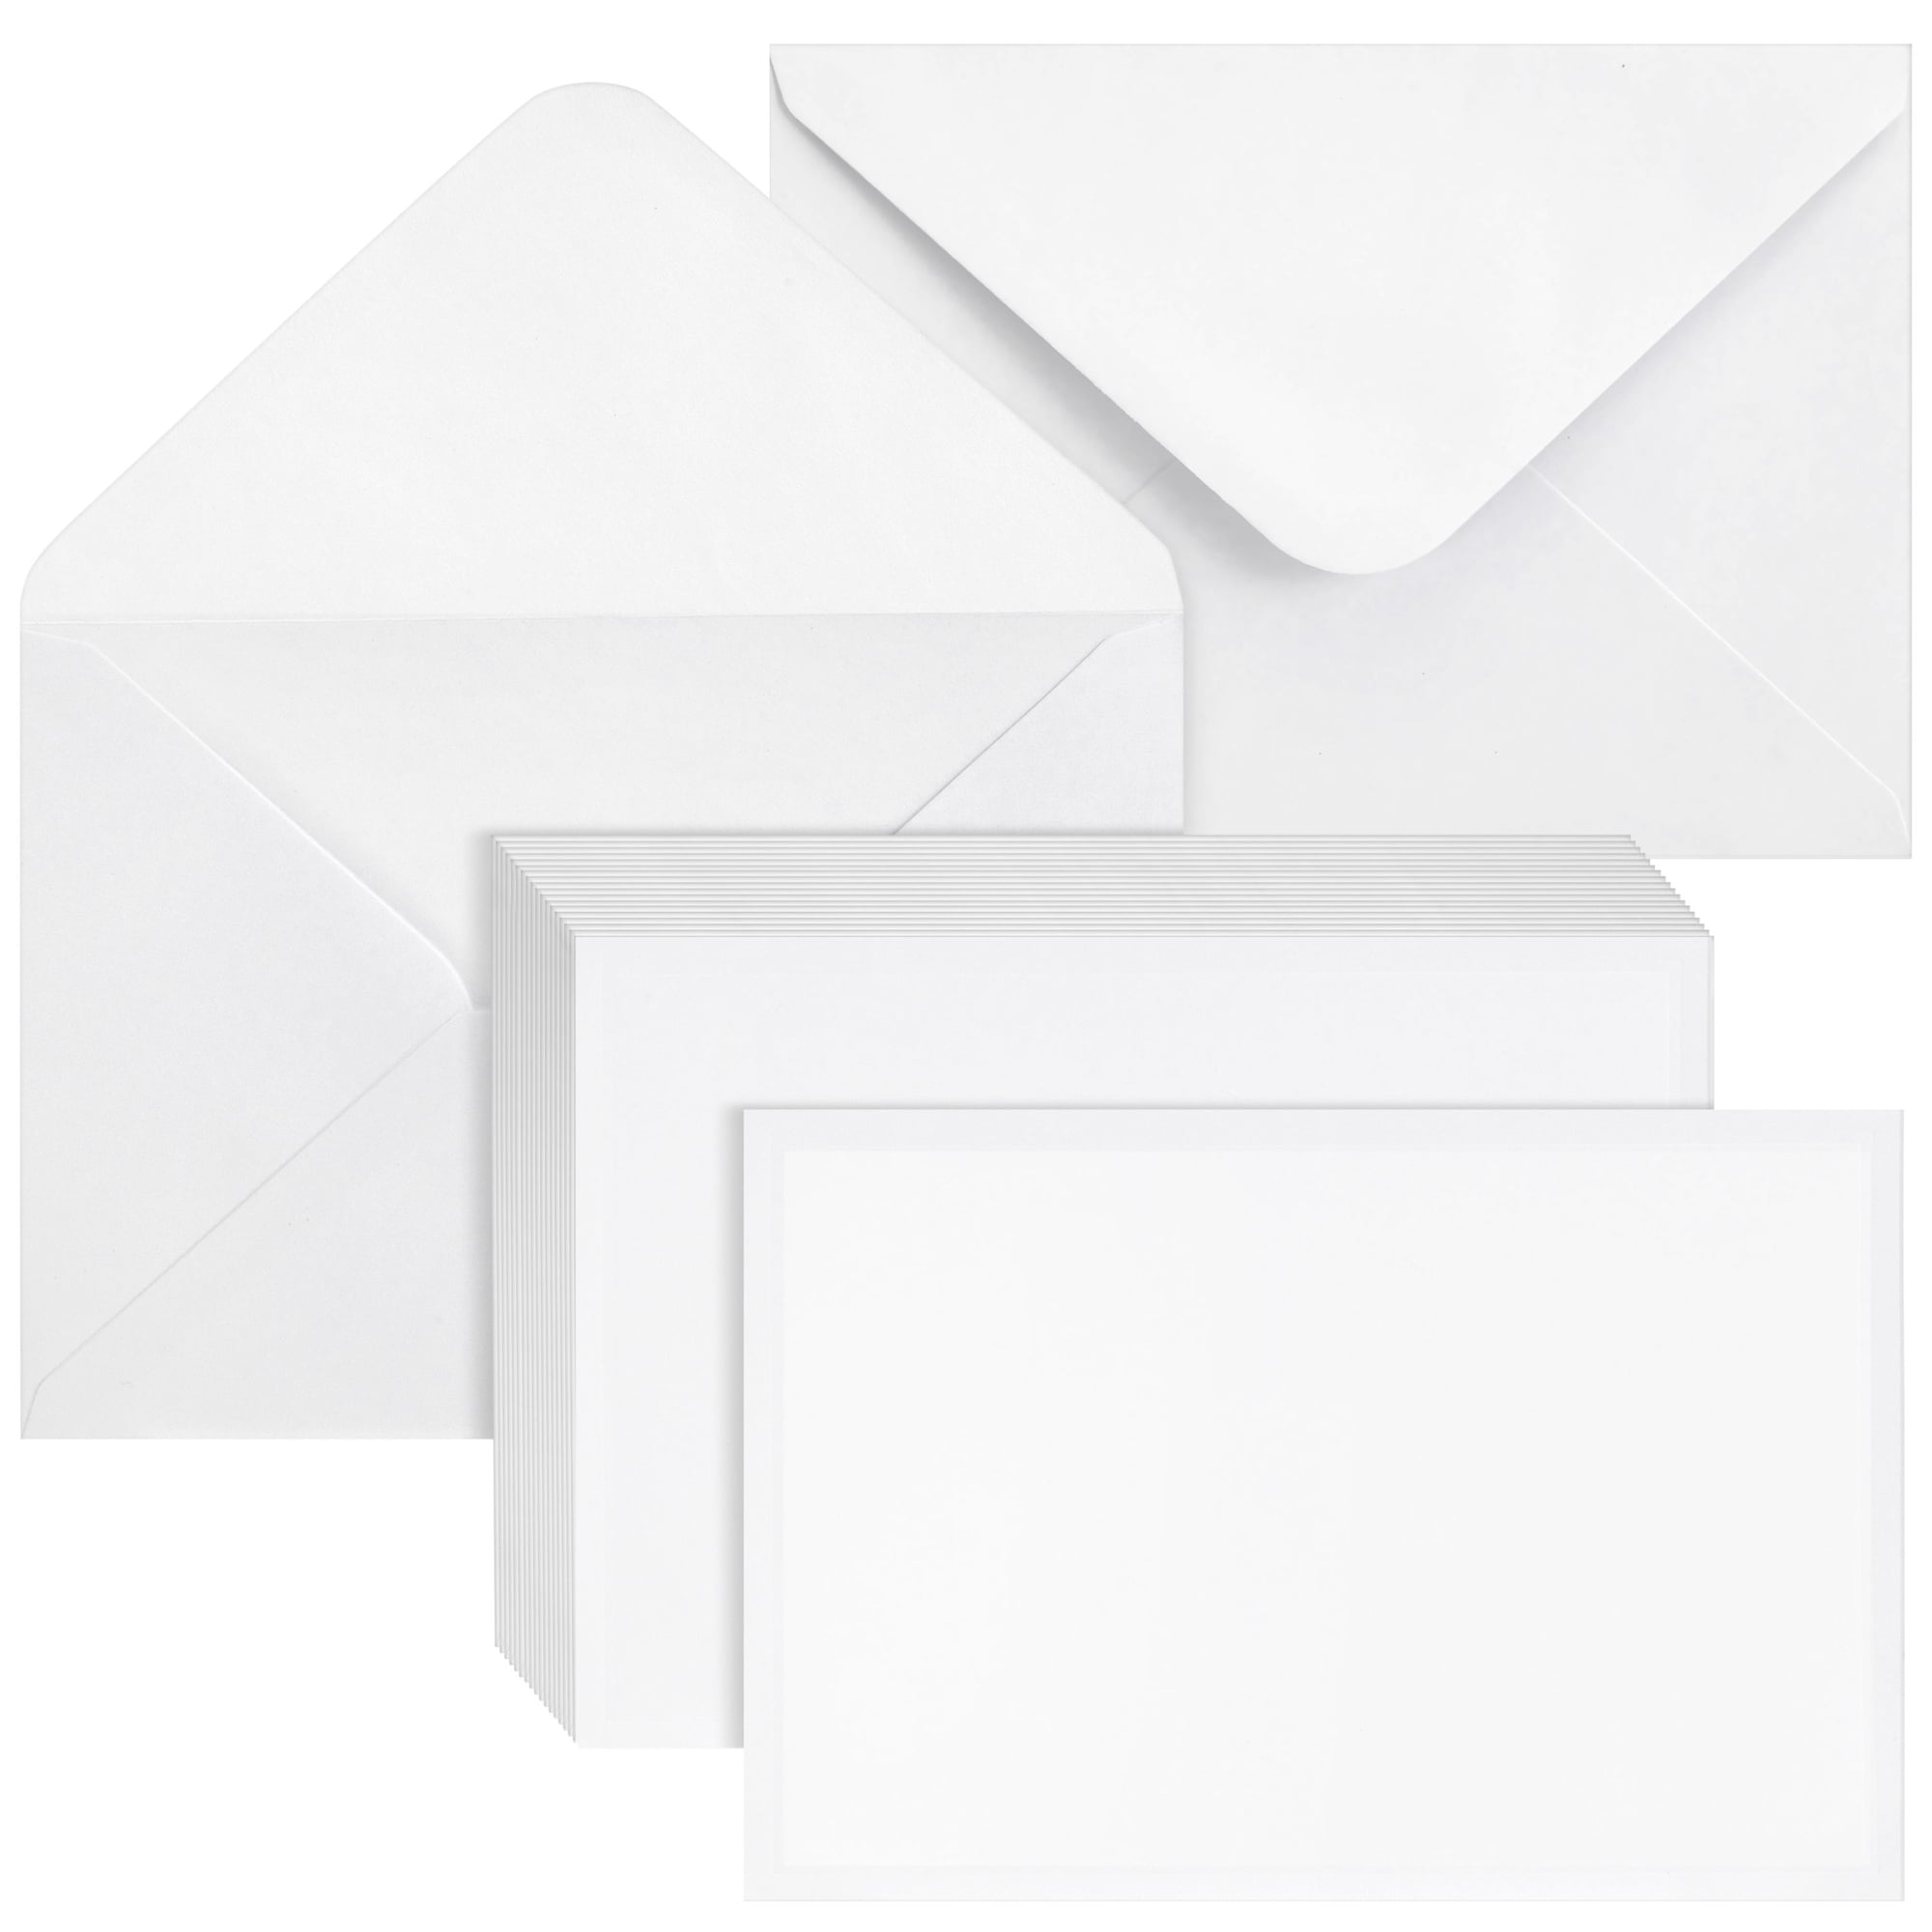  60 Pack Blank Cards and Envelopes 10 x 15 cm, Vintage  Stationery for Card Making, Party Invitations, Announcements, Scrapbooking,  Blank Inside, 6 Assorted Antique Designs : Office Products